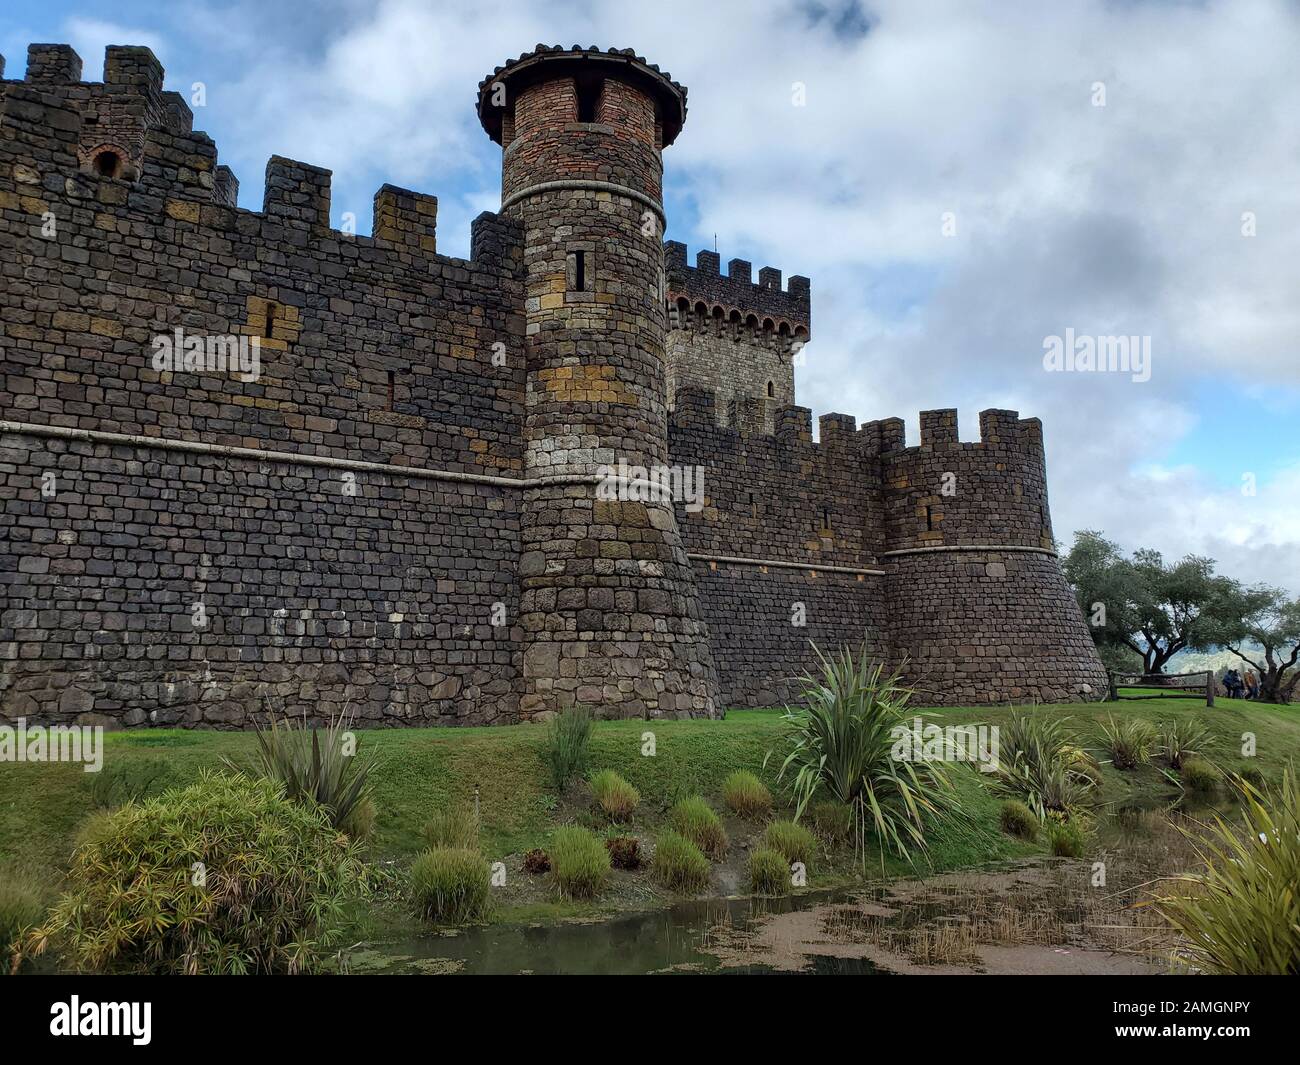 Walls and ramparts at Castello di Amorosa, a vineyard in the Calistoga AVA of the Napa Valley in the California Wine Country, housed in a large reconstruction of a Tuscan castle, Calistoga, California, December 22, 2019. Castello di Amorosa is a popular tourist destination for visitors to the Napa Valley. () Stock Photo